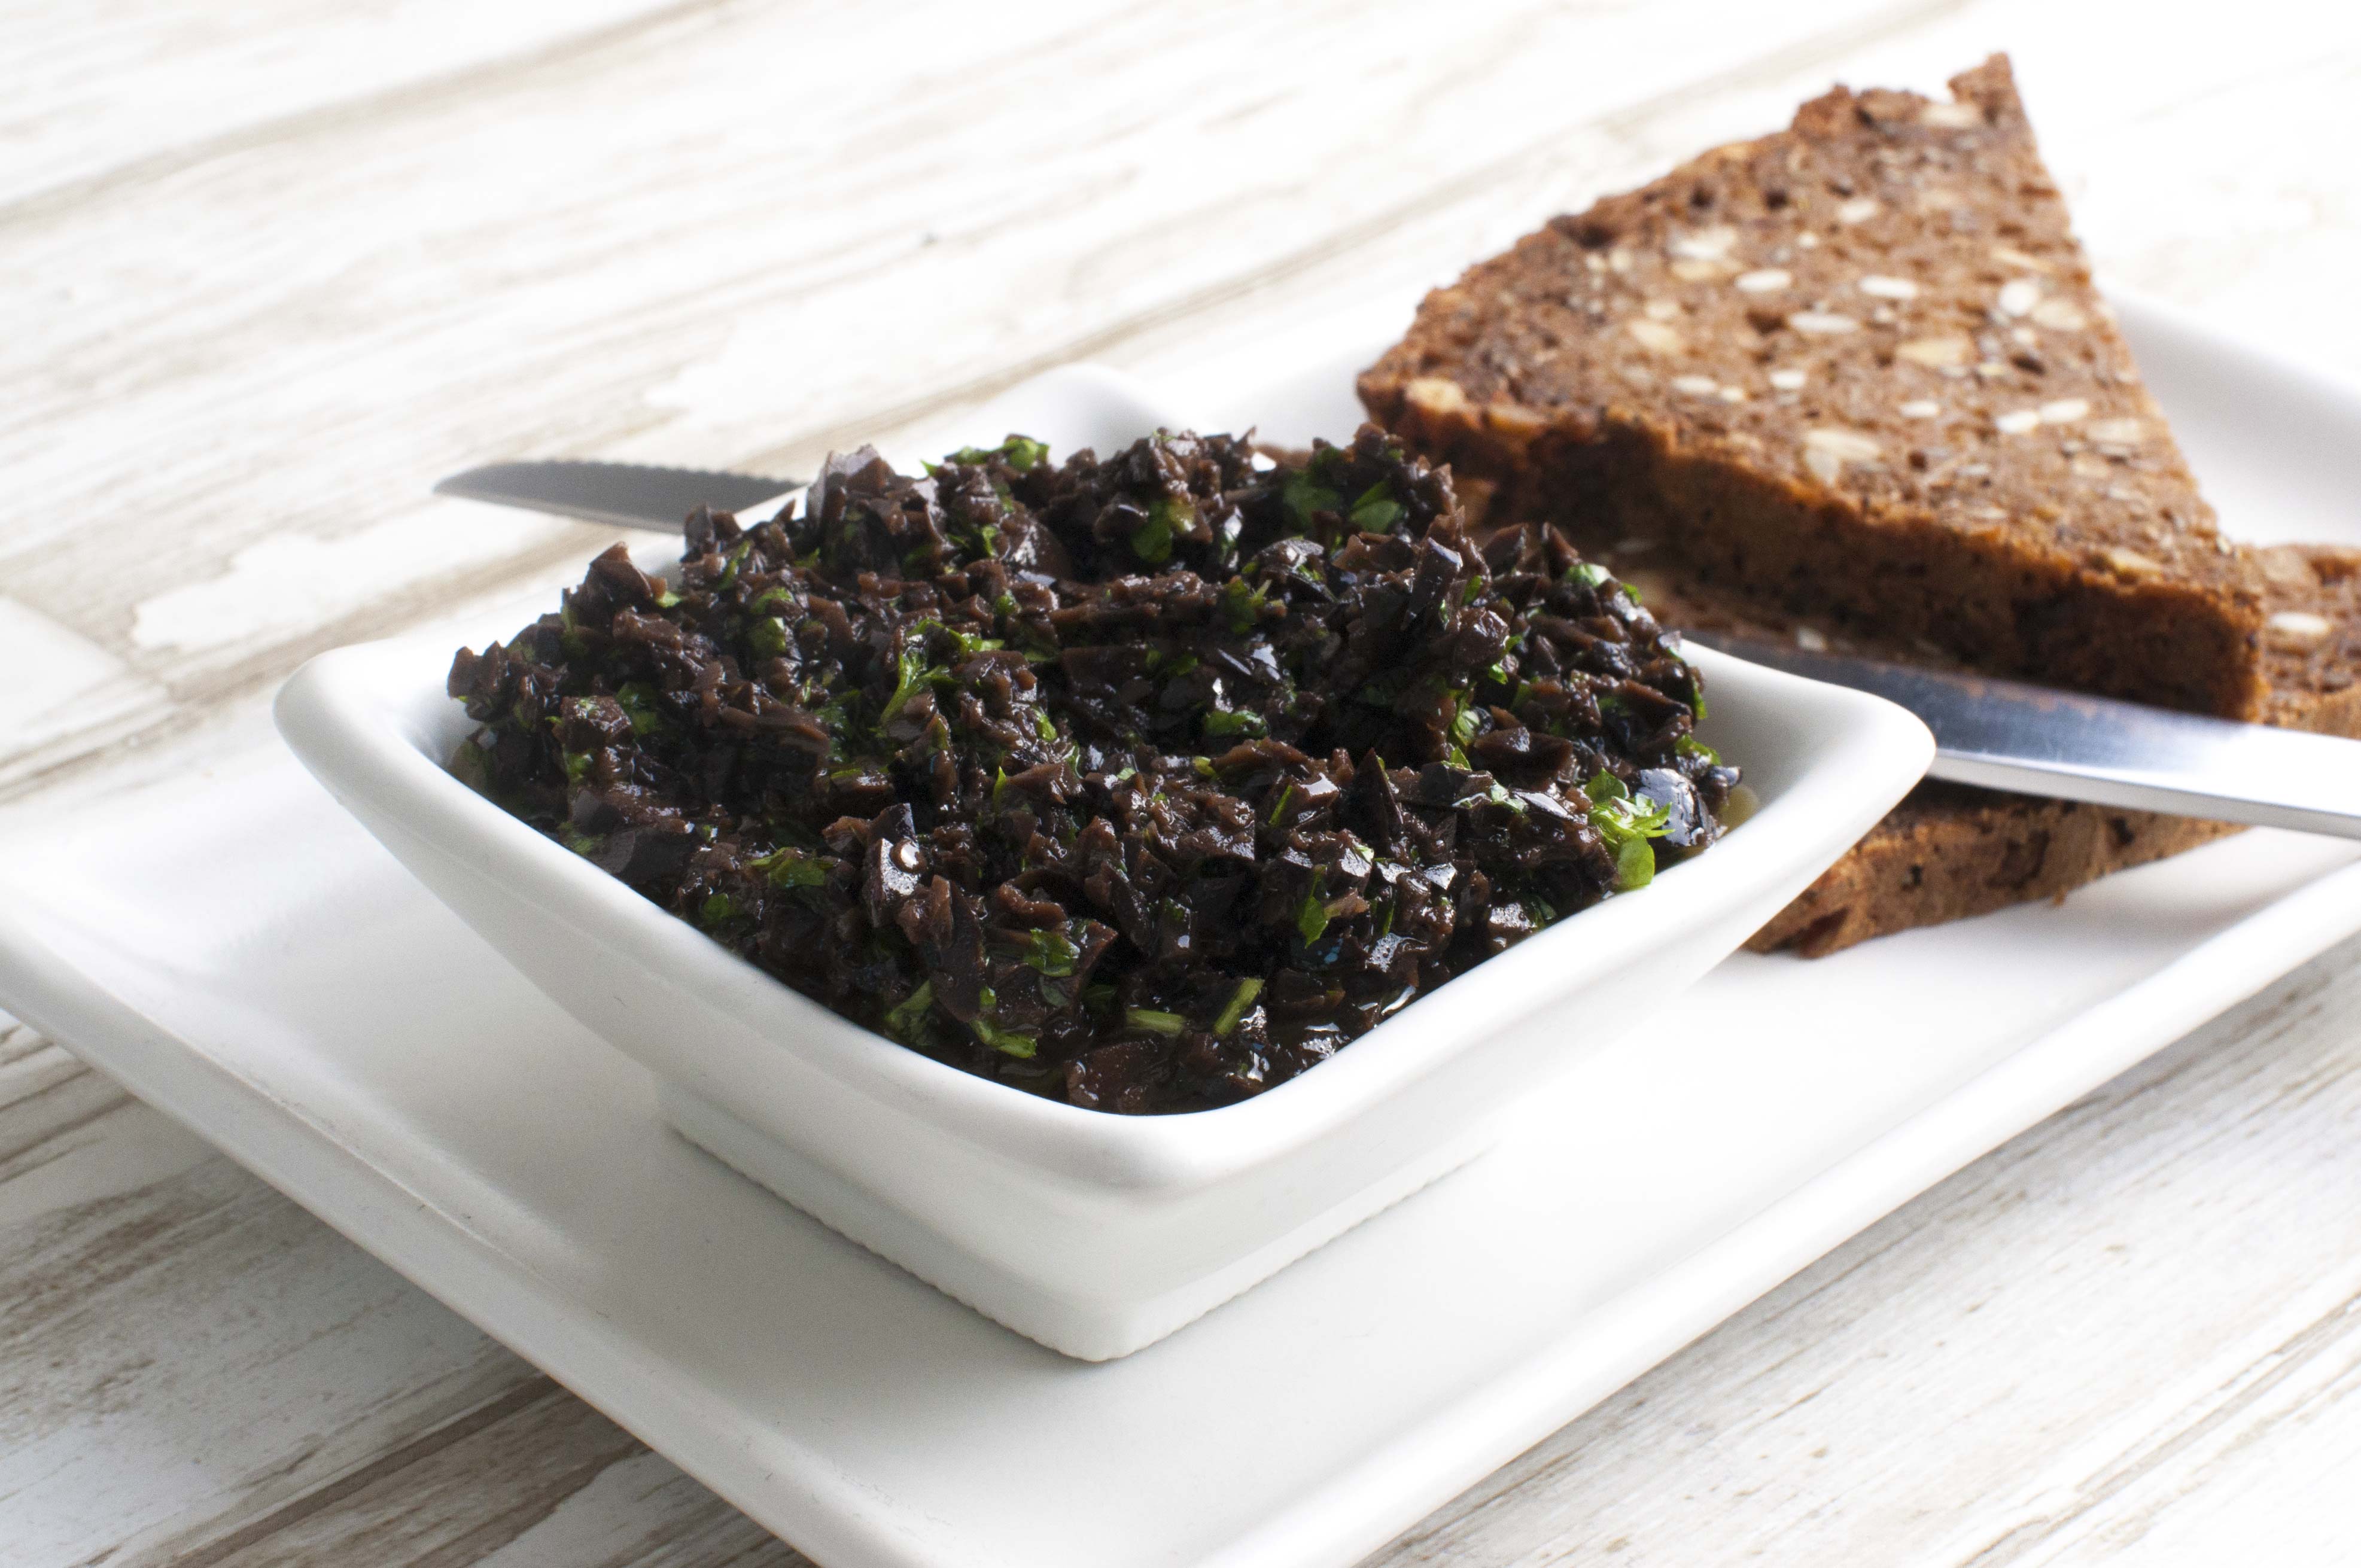 Homemade black olive tapenade - perfect for tapas